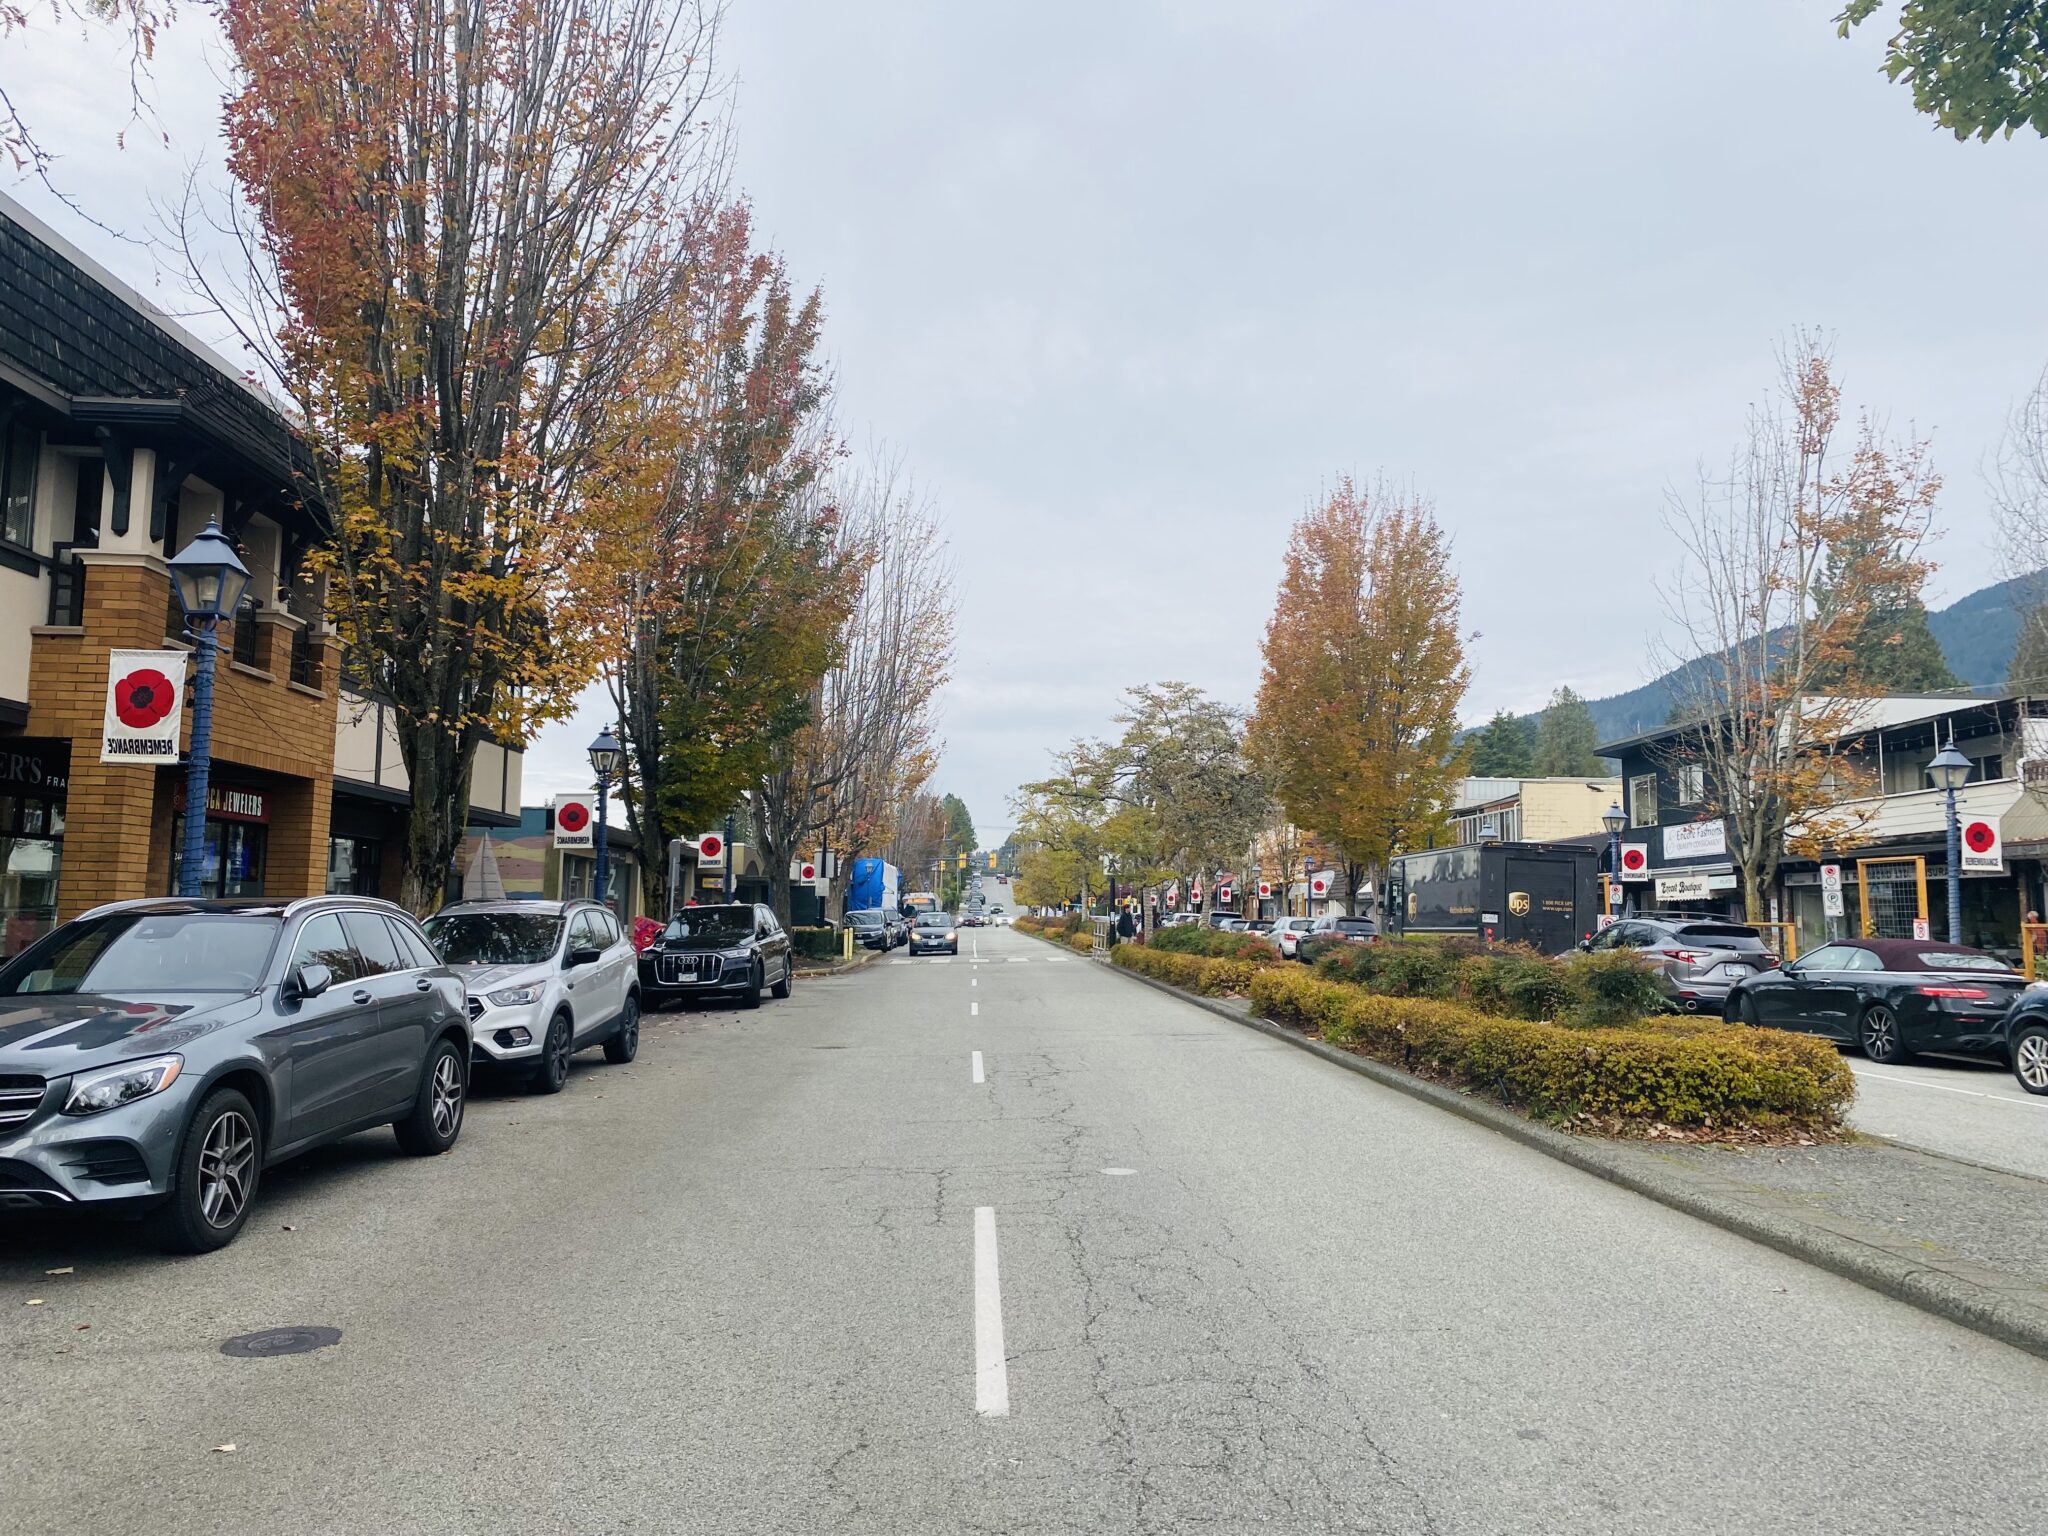 Street in Dundarave, West Vancouver on a cloudy day